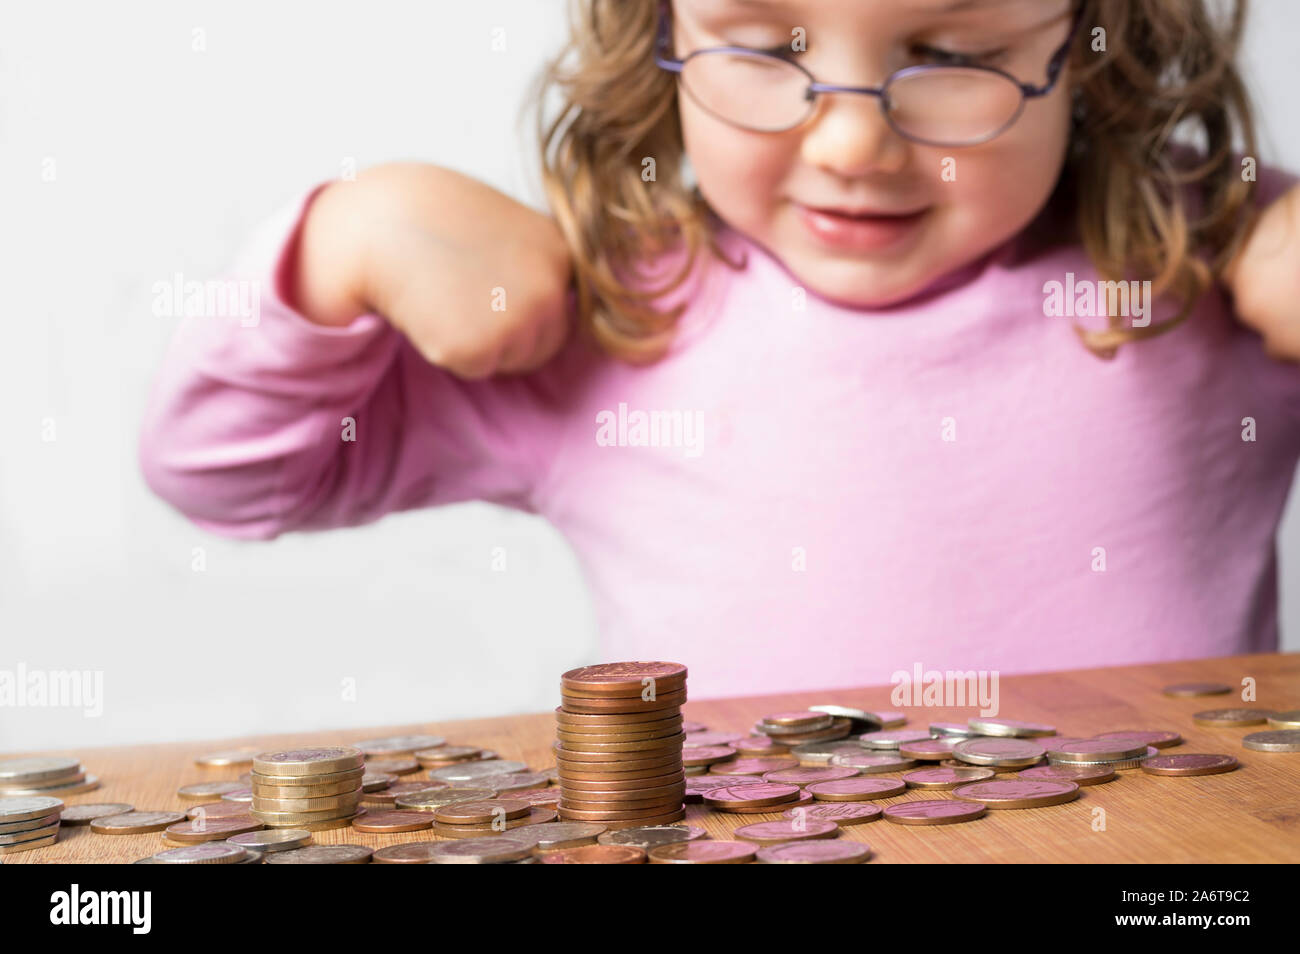 Smiling girl wearing glasses dressed in pink counting coins for savings. Focus on the coins at the front. Clean neutral background and copy space on t Stock Photo